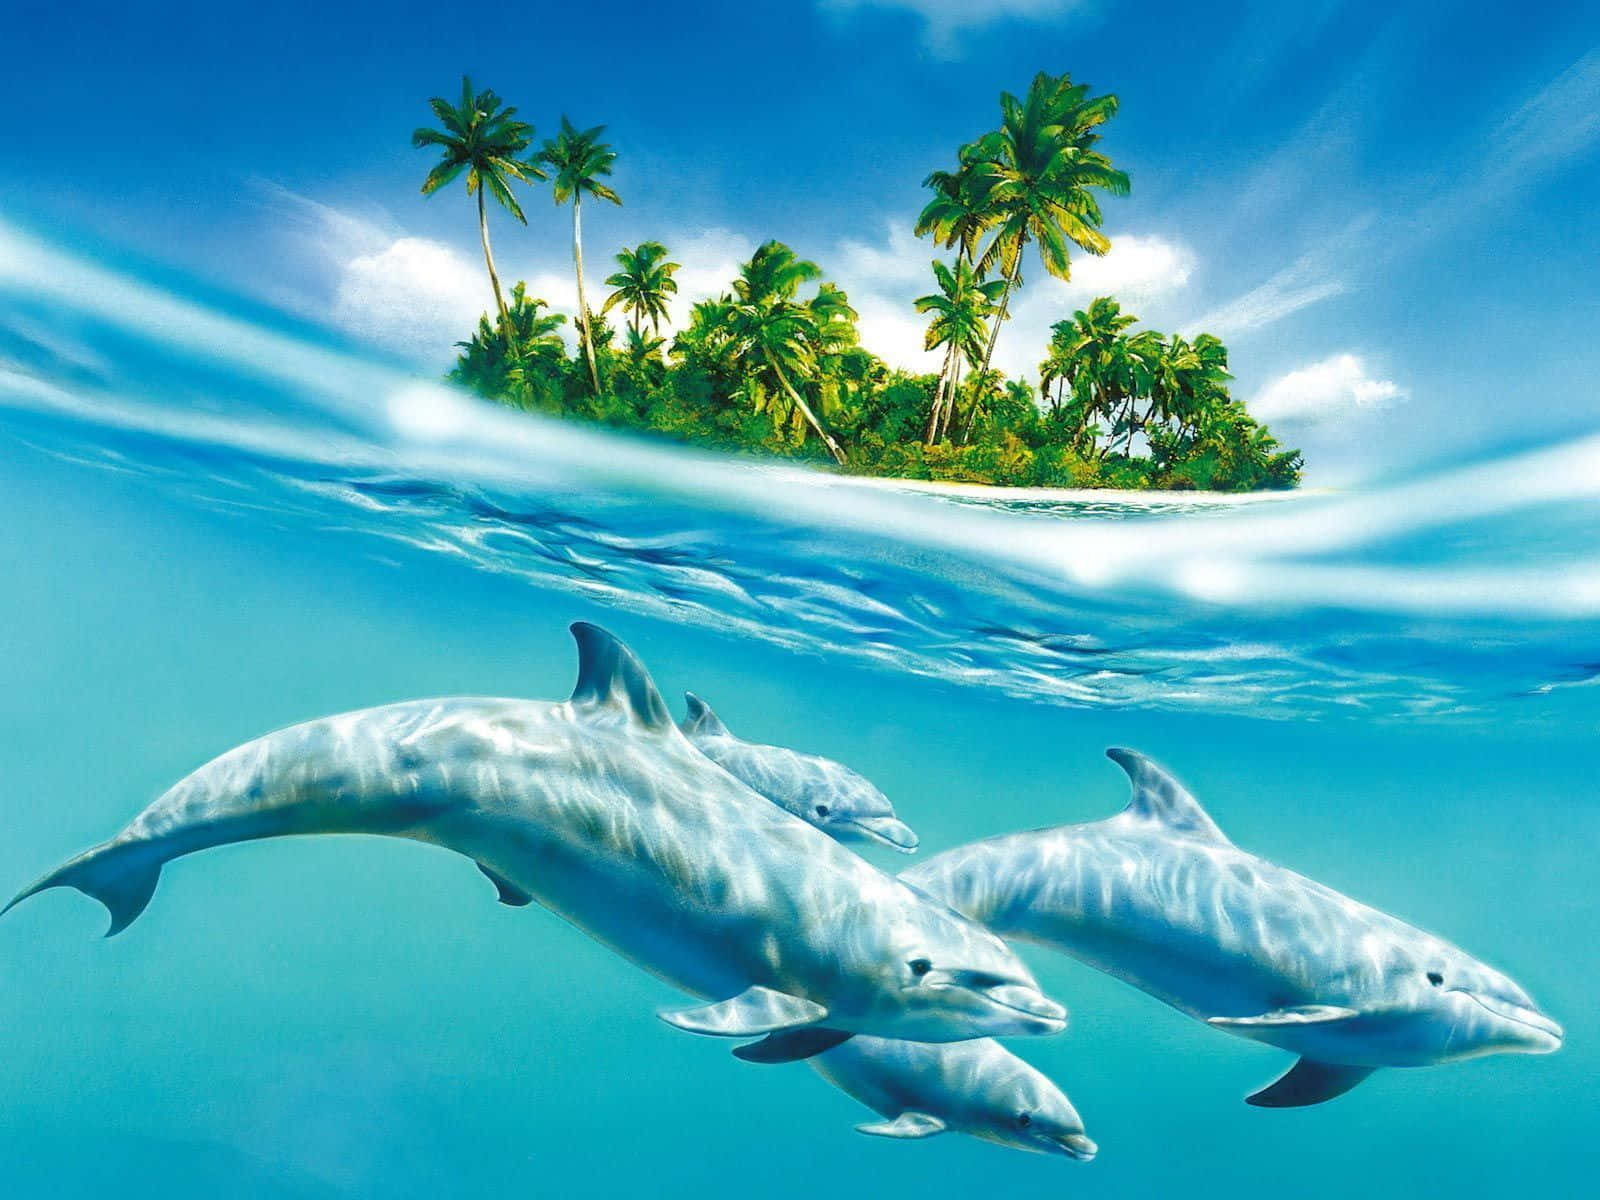 Enjoy the Cool Breeze with a Magic Jumping Dolphin! Wallpaper